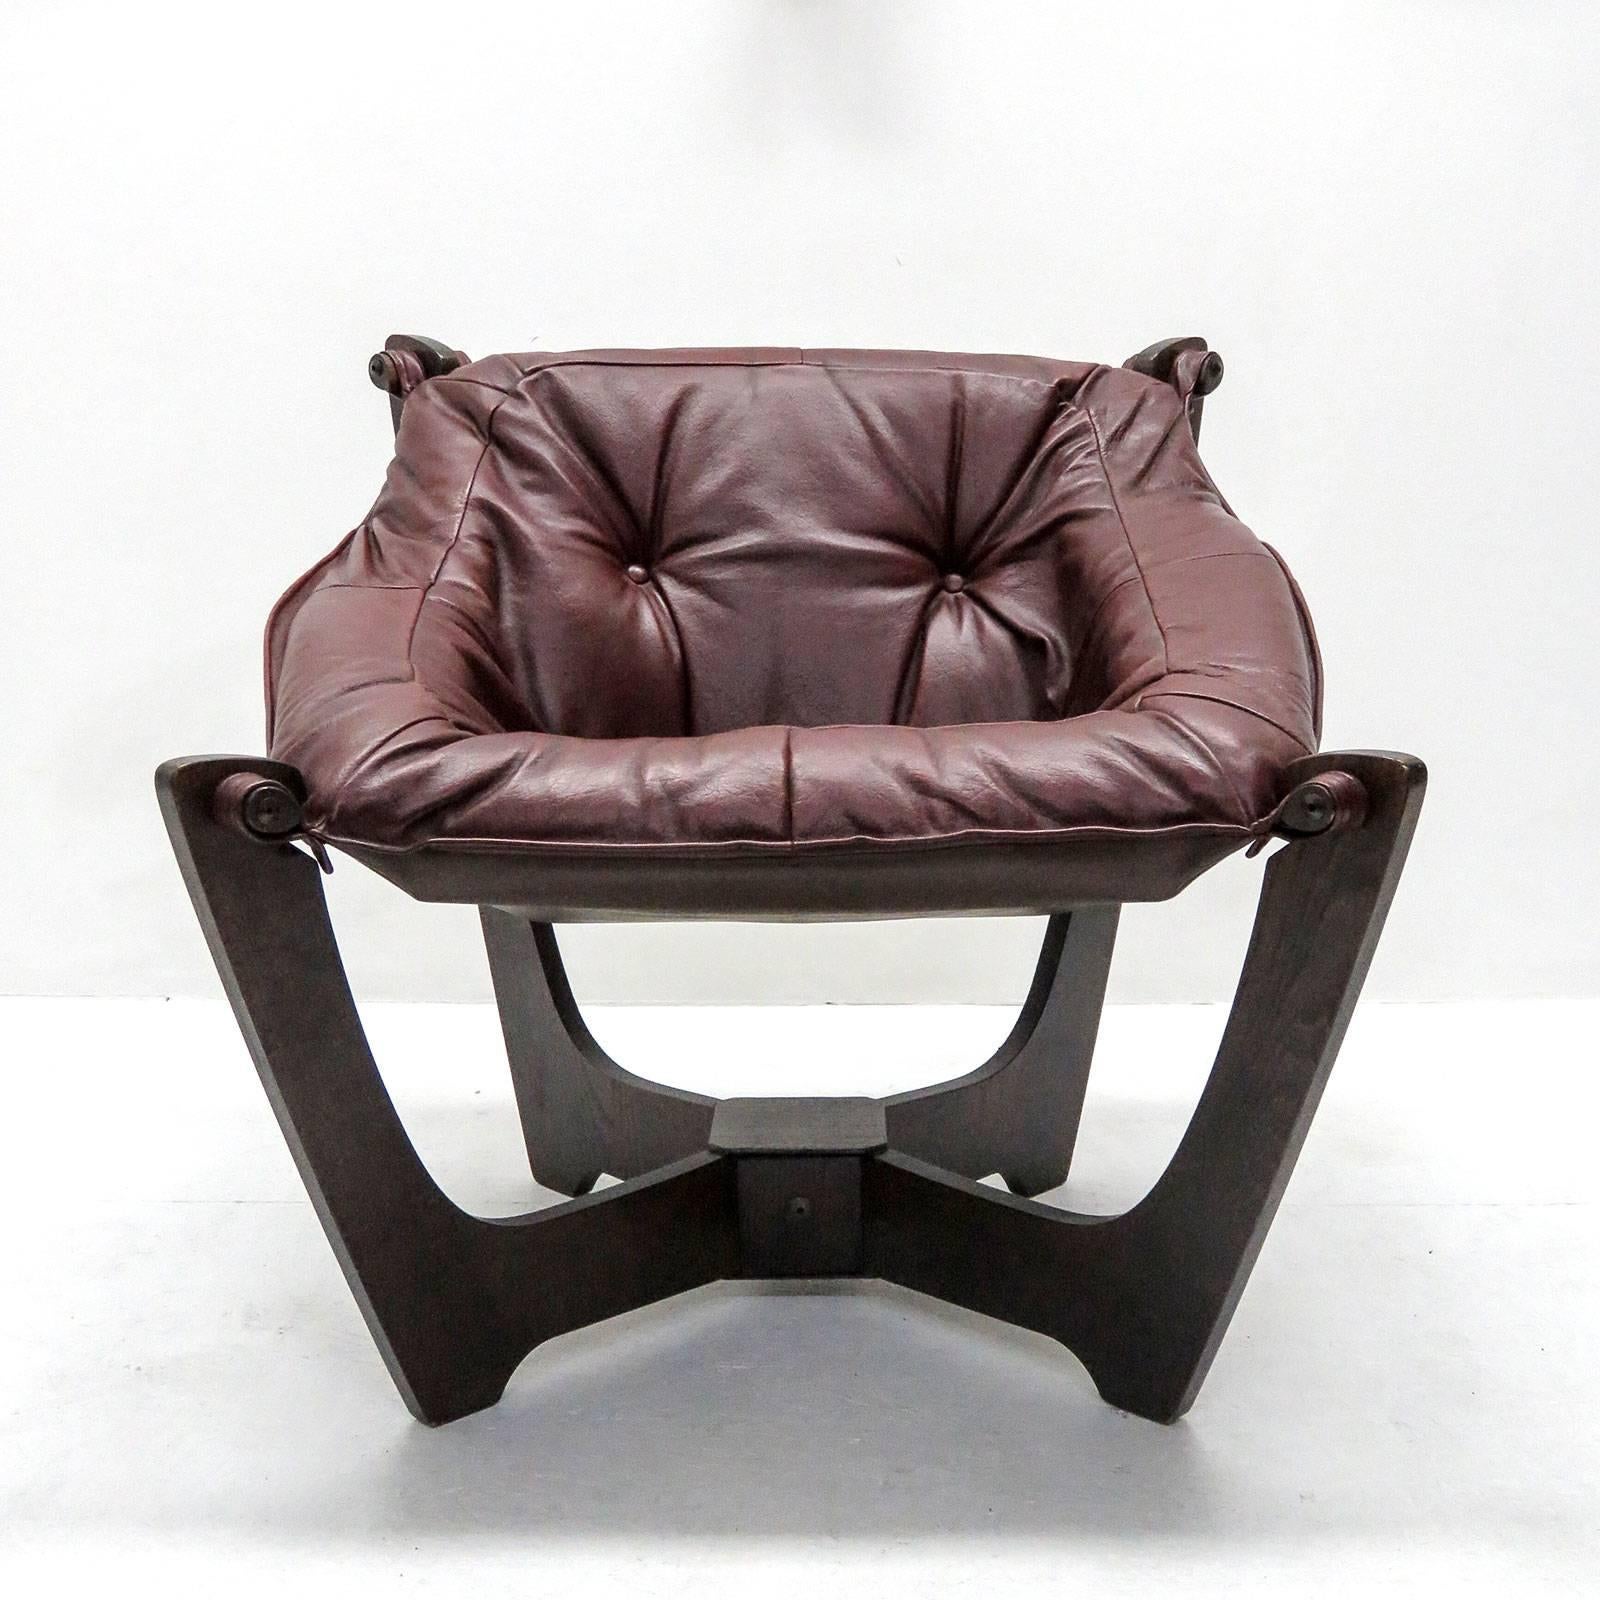 Wonderful 'Luna' armchair by Odd Knutsen for Hjellegjerde, frame of dark stained wood, mounted with oxblood semi-aniline leather seat produced in the 1970s.